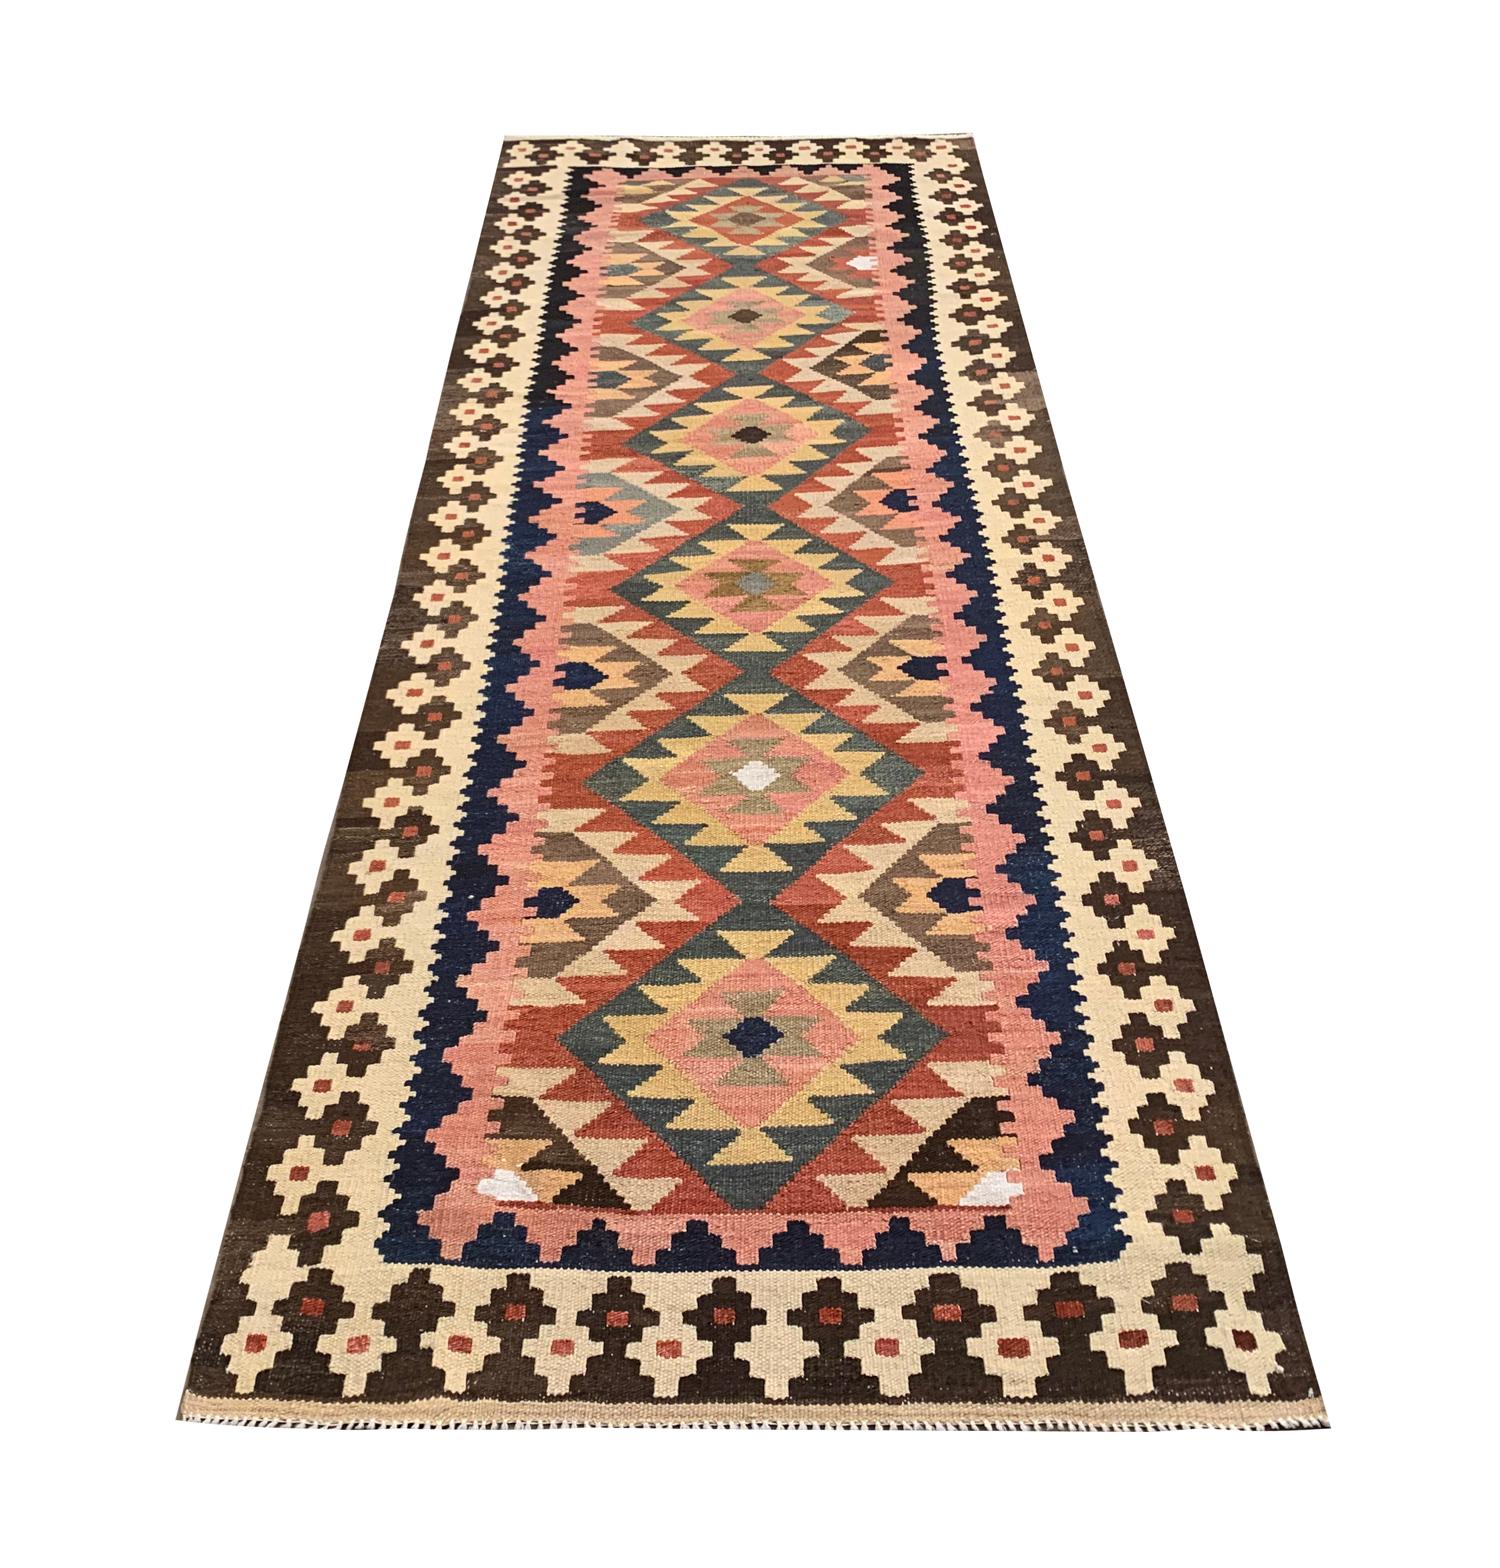 This handwoven bold wool kilim is a vintage Afghan rug woven by hand in the early 21st century, circa 2010. In this geometric rug, the central design features a bold pattern woven with beige, pink, green and beige accents. The colour palette of the